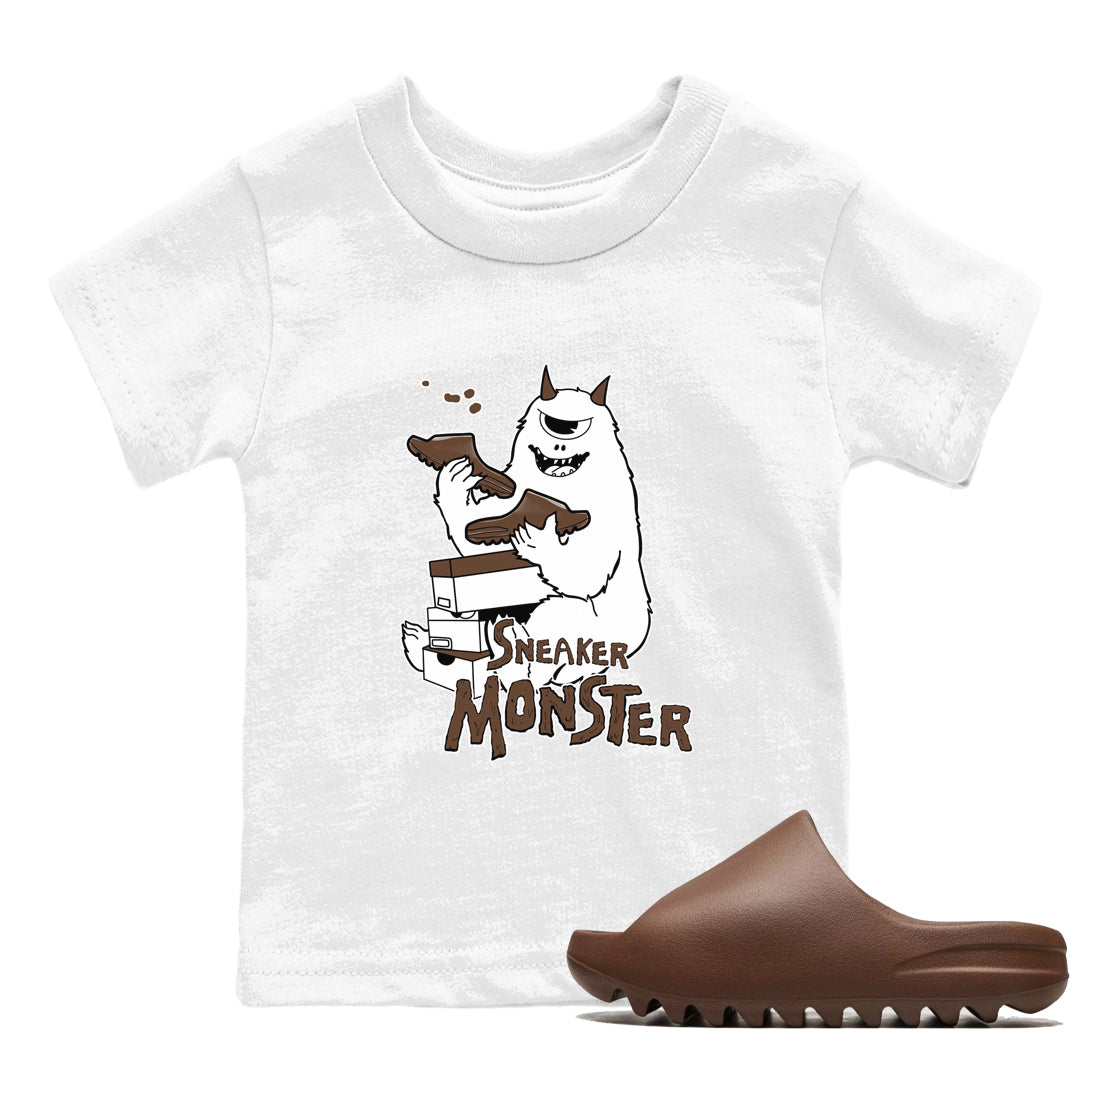 Yeezy Slide Flax shirts to match jordans Sneaker Monster sneaker match tees Yeezy Slide Flax SNRT Sneaker Tees streetwear brand Baby and Youth White 1 cotton tee